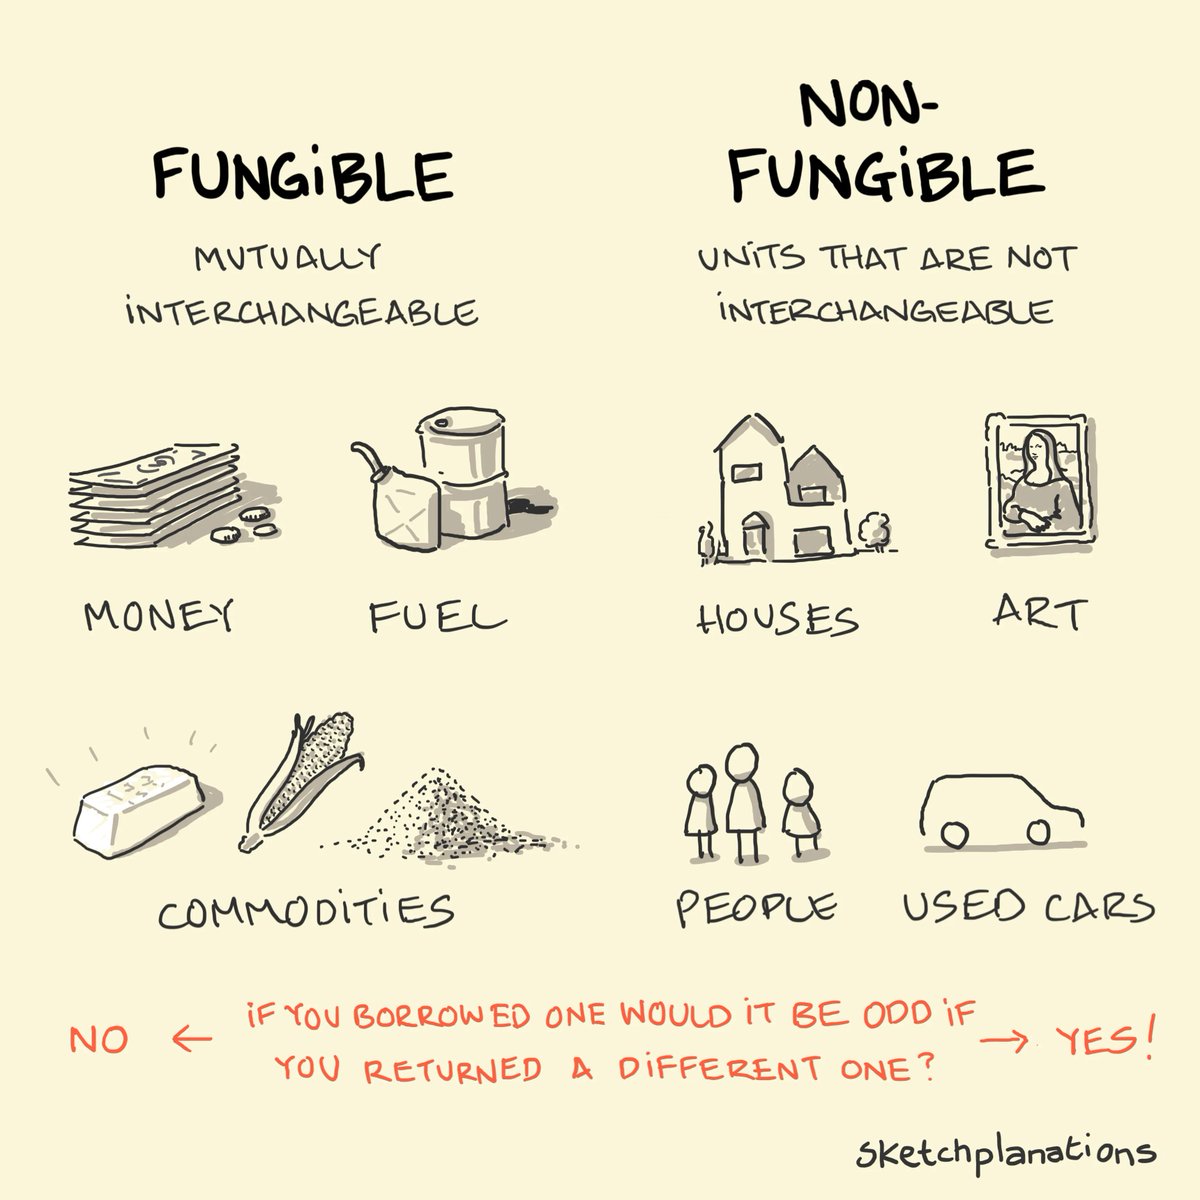 Thought experiment: if you were to borrow something, would it make a difference if you returned a different one? If you borrowed my car, you could return it with a different tank of fuel (fungible) but if you returned a different used car (non-fungible) that would be rather odd.